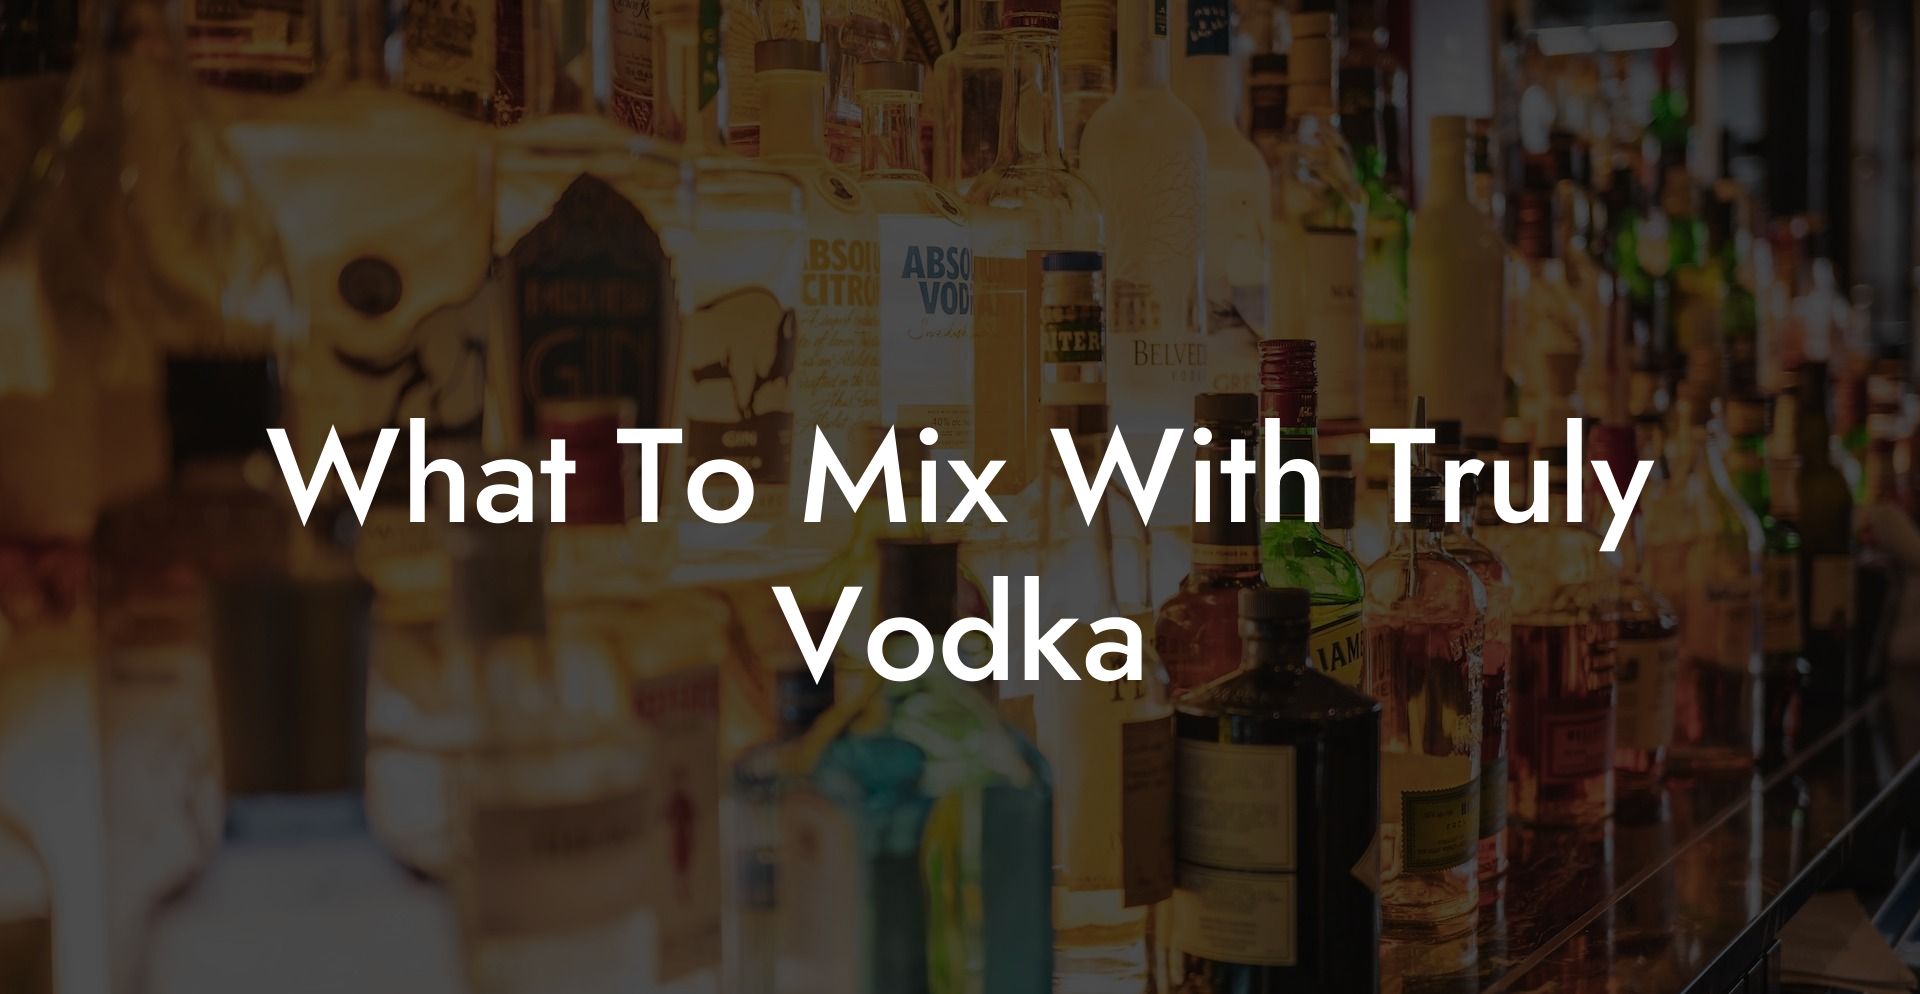 What To Mix With Truly Vodka